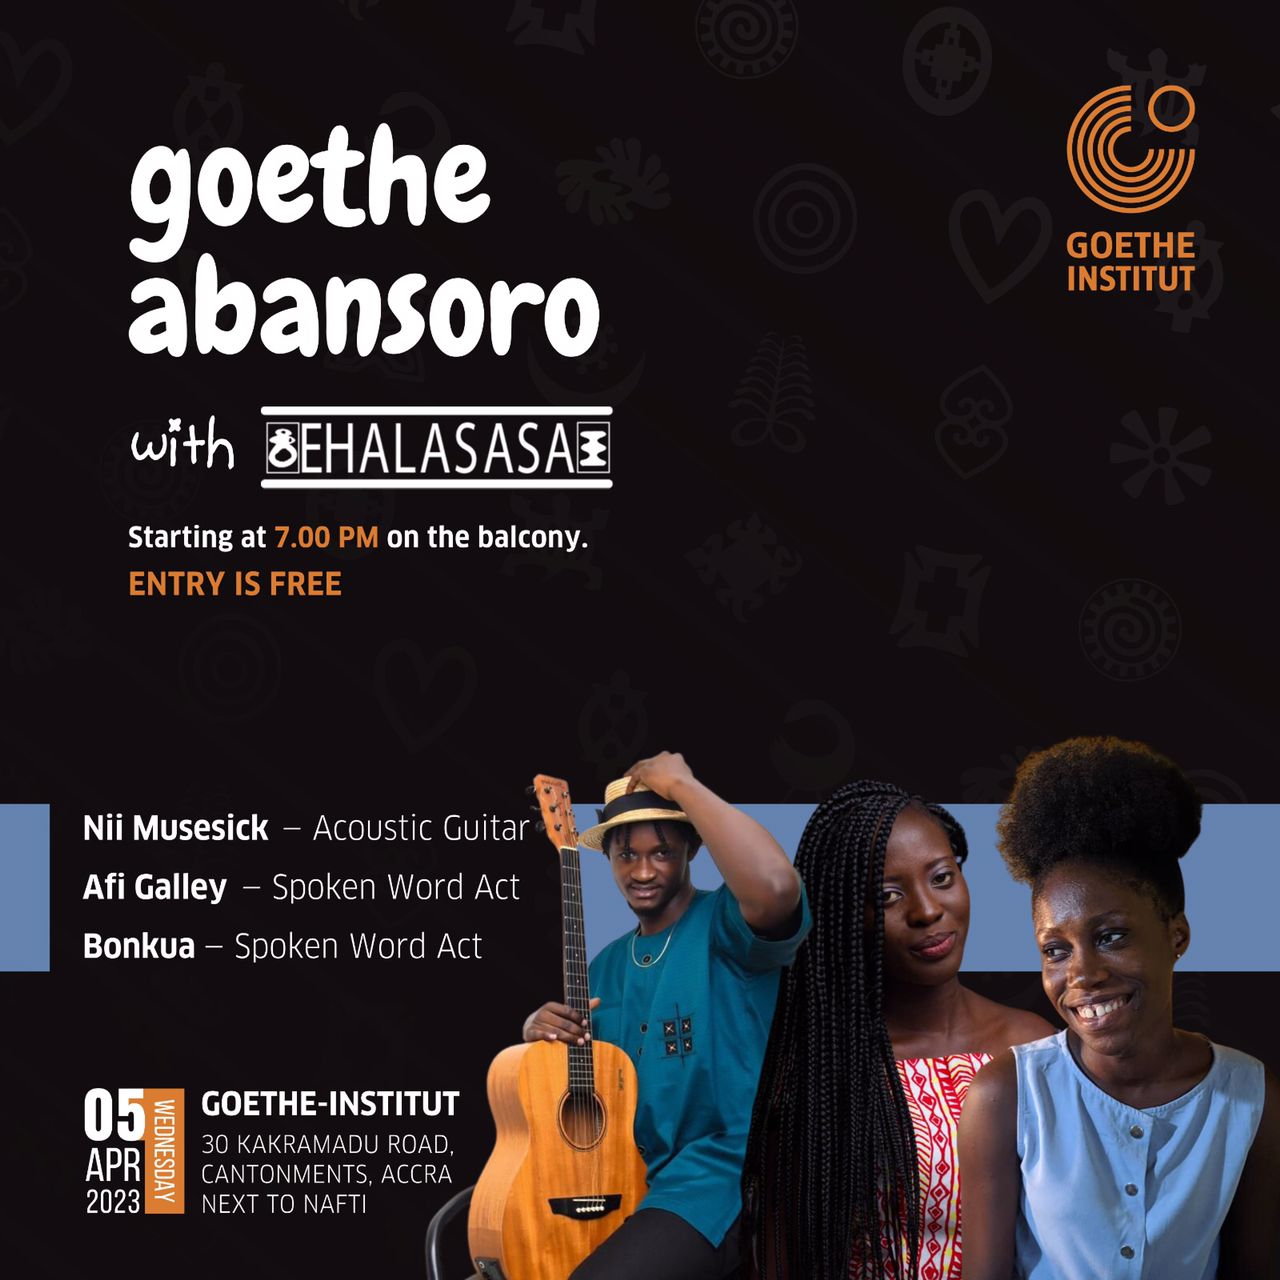 Experience an Unforgettable Night of Music and Spoken Word At the Goethe Abansoro with Ehalakasa